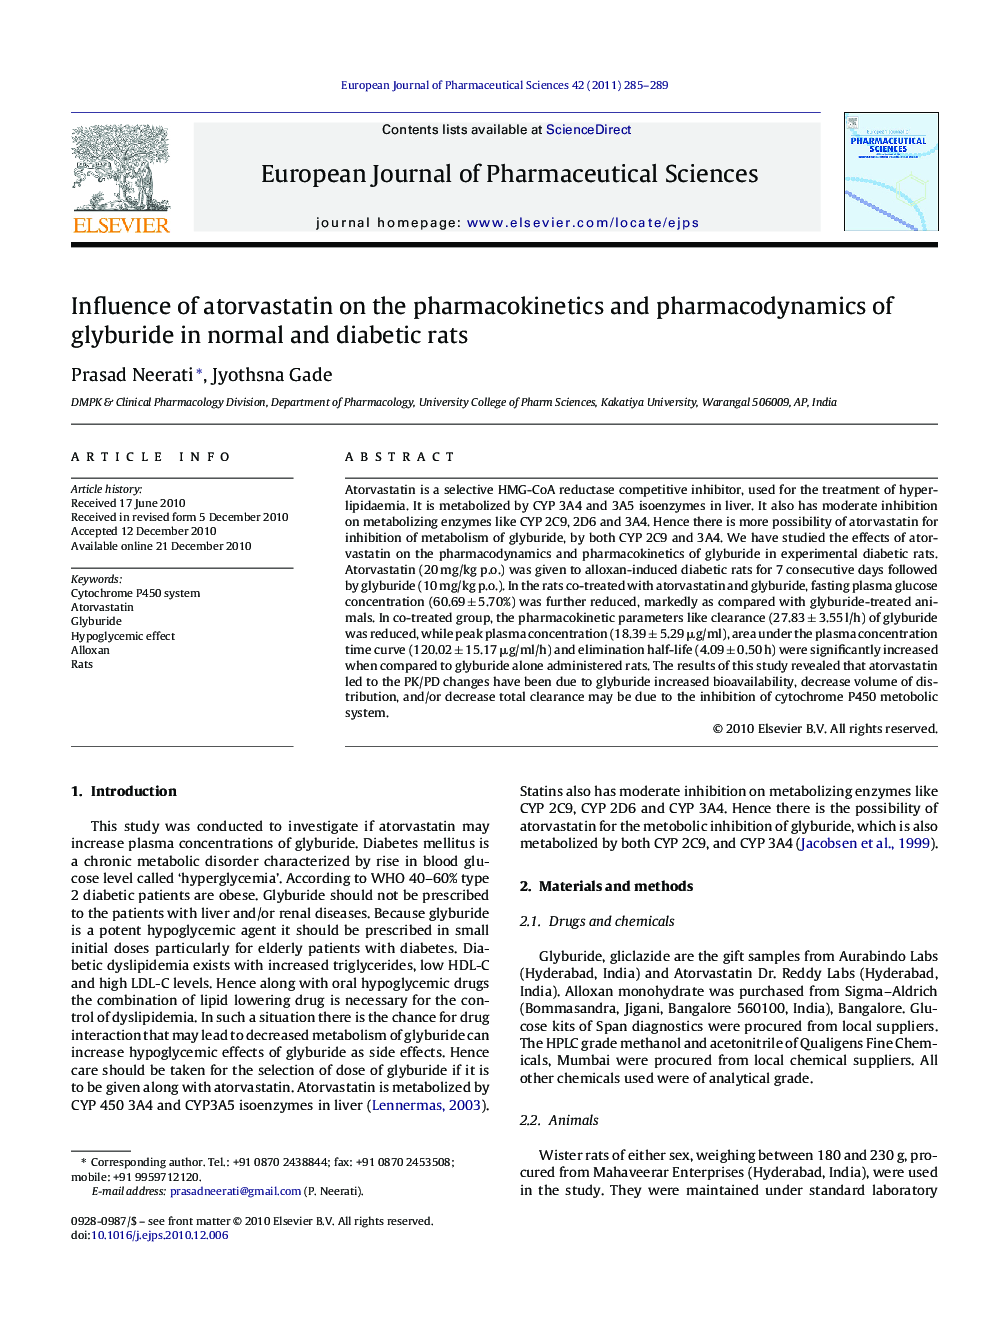 Influence of atorvastatin on the pharmacokinetics and pharmacodynamics of glyburide in normal and diabetic rats